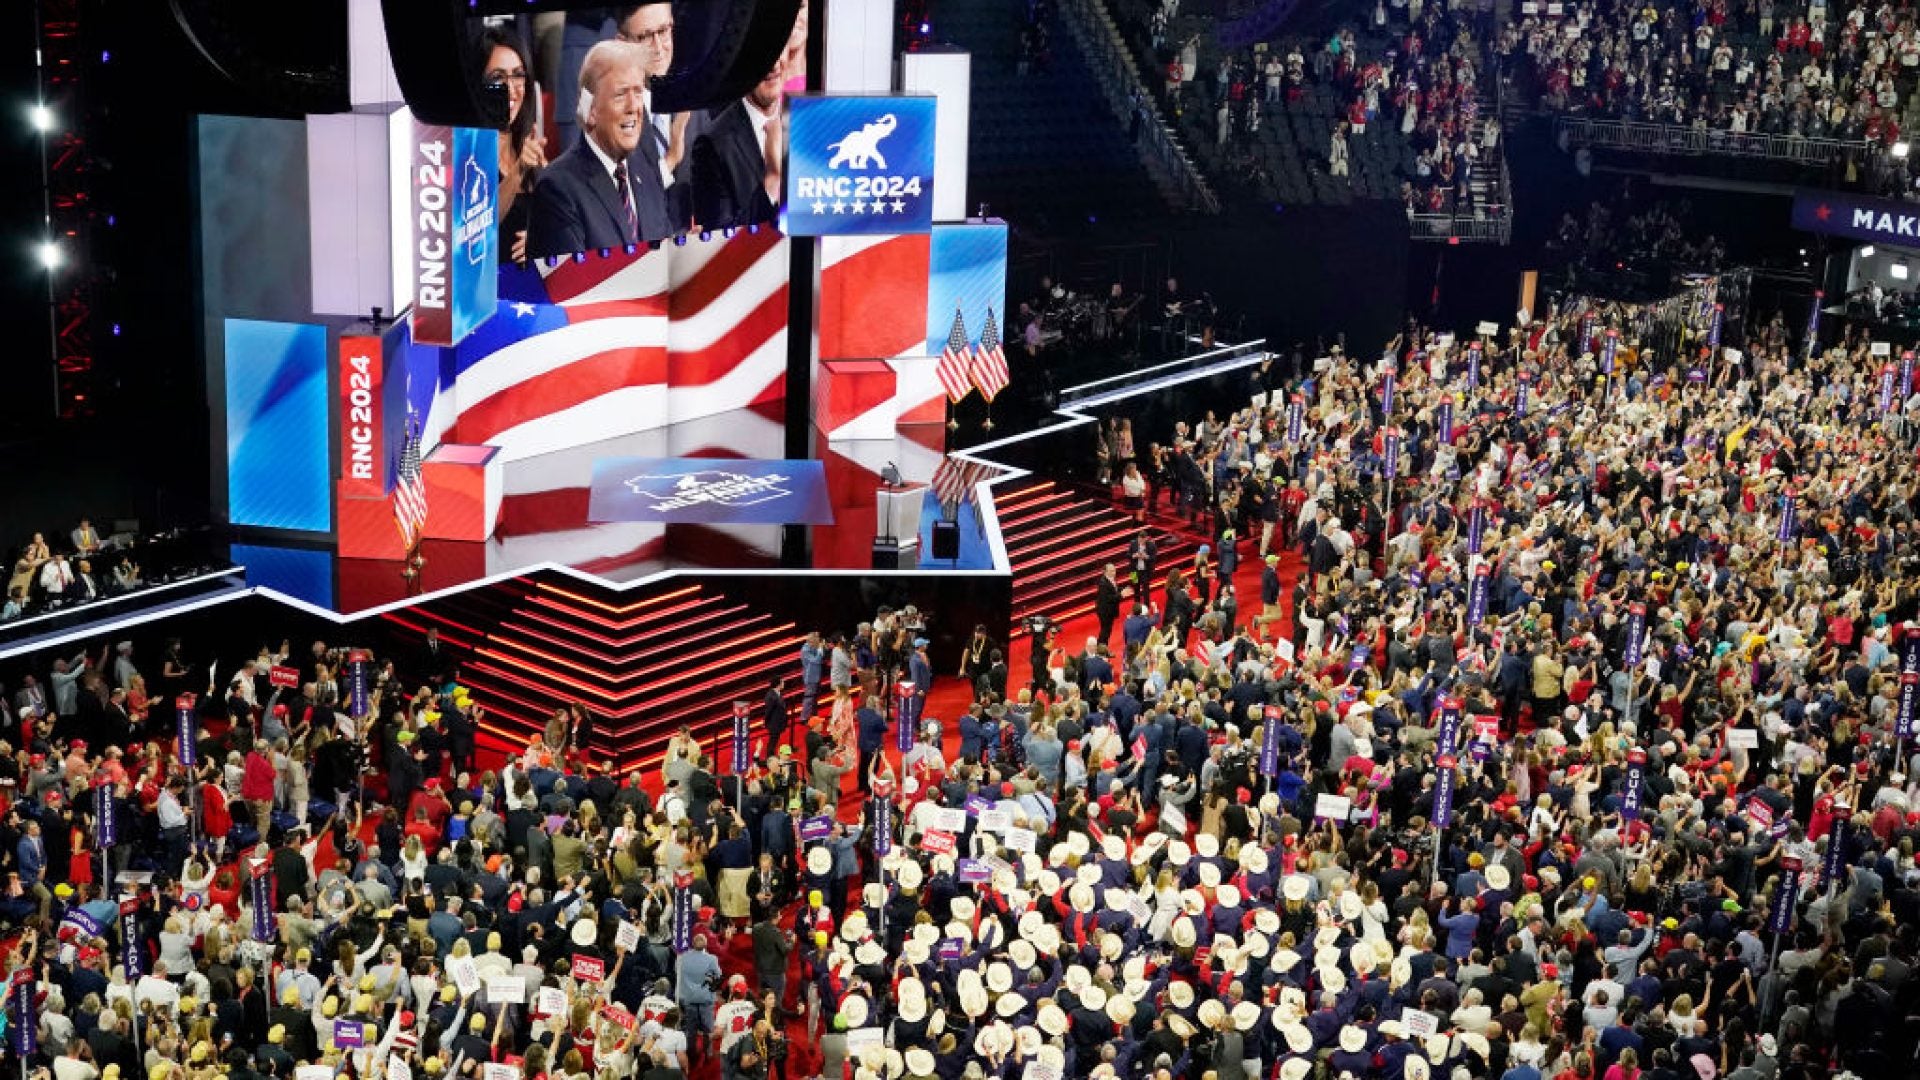 Top 5 Takeaways from The 2024 Republican National Convention